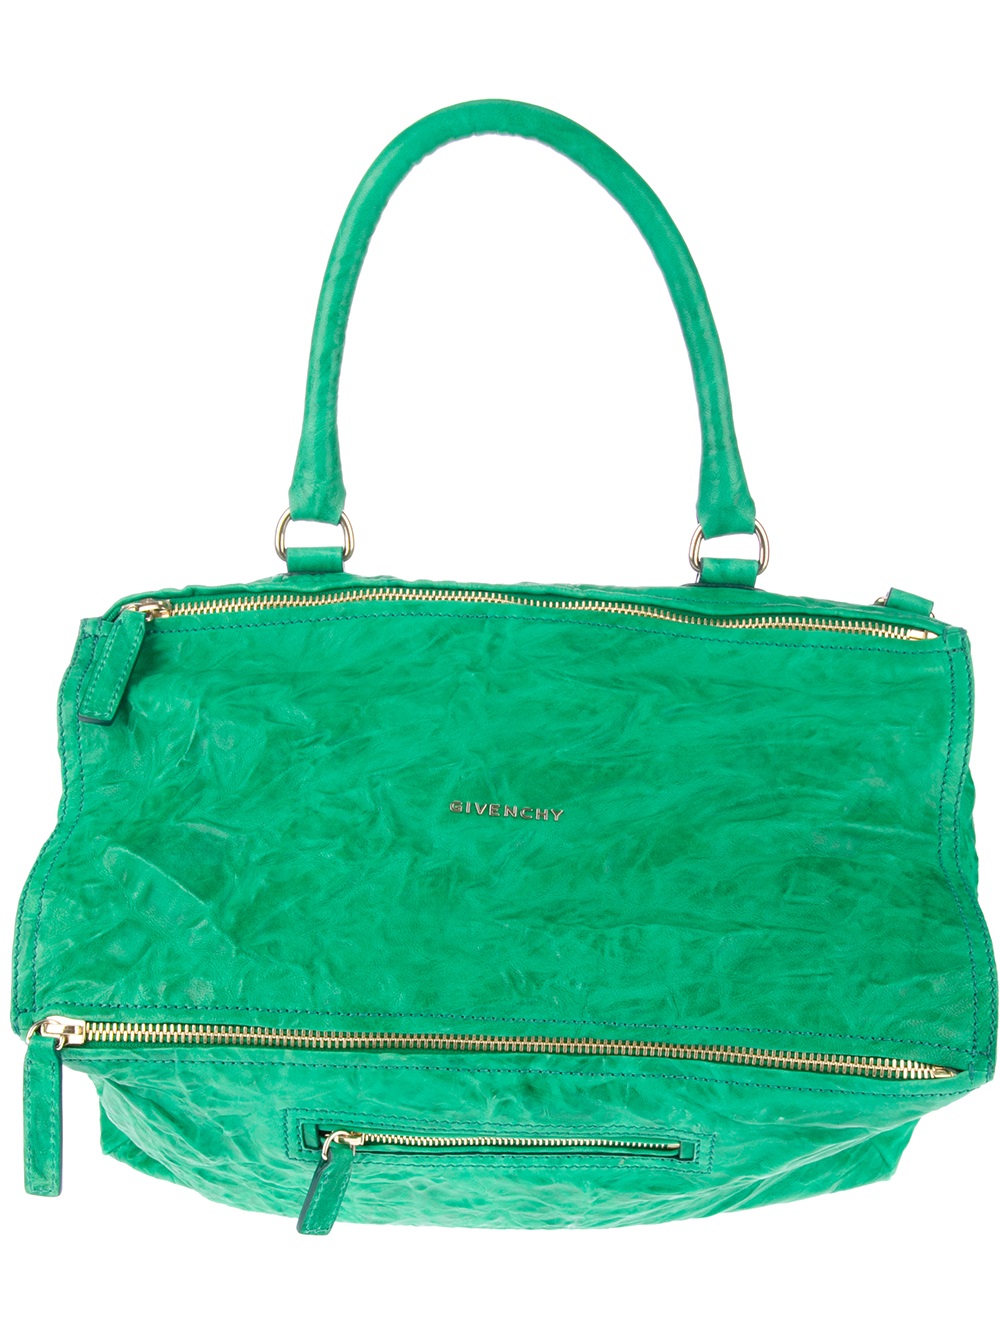 Givenchy Pandora Bag in Green | Lyst